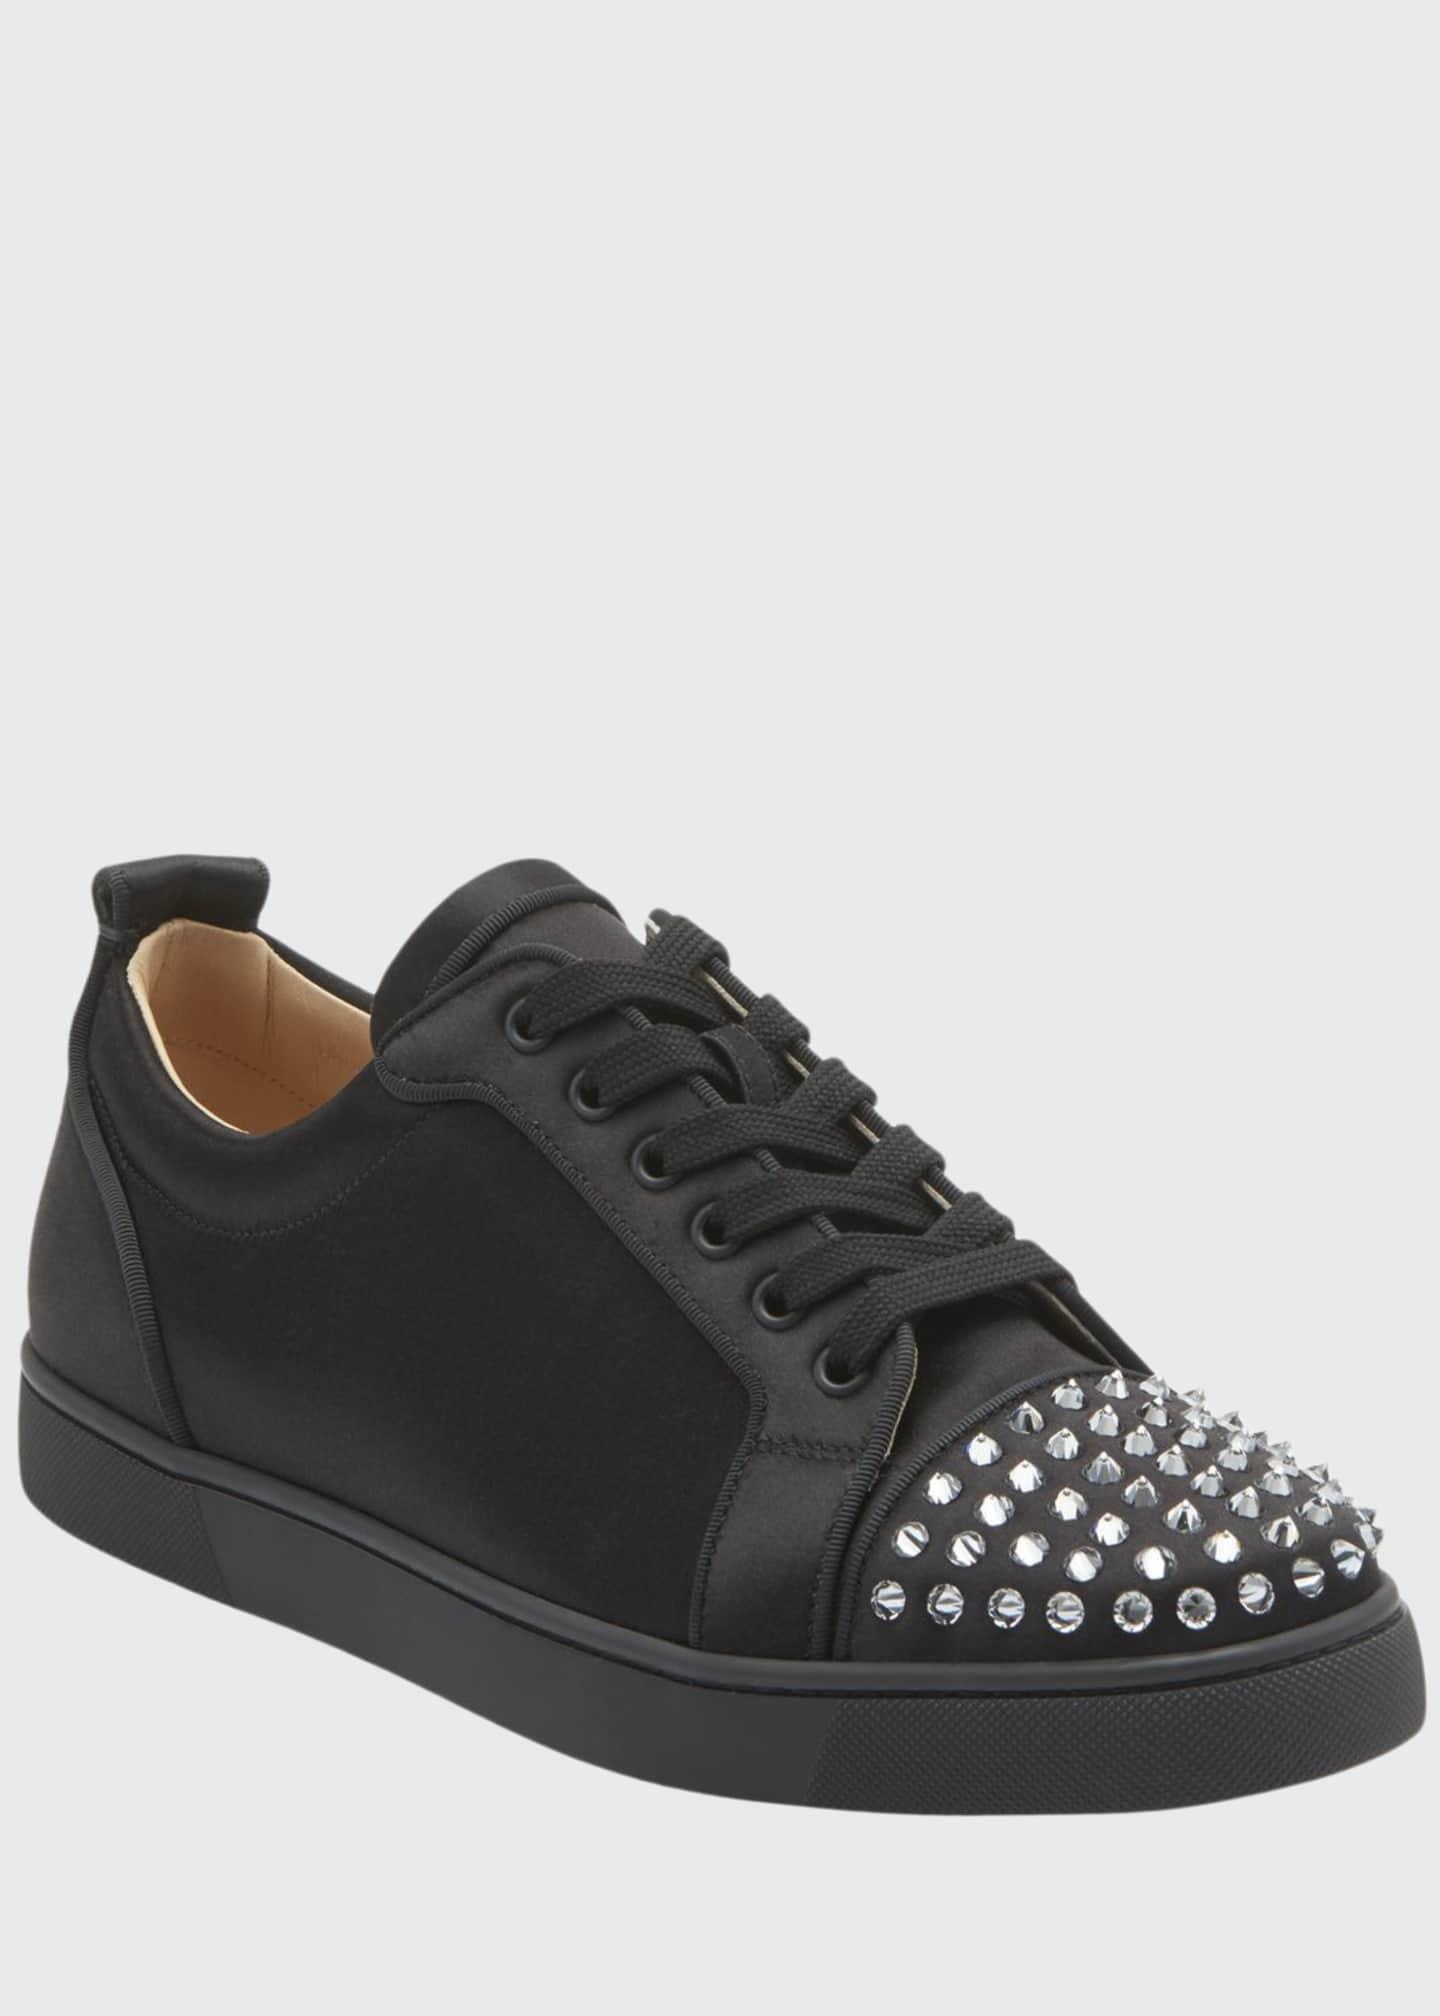 Christian Louboutin Leather Men&#39;s Louis Junior Spikes Red Sole Sneakers in Black for Men - Lyst